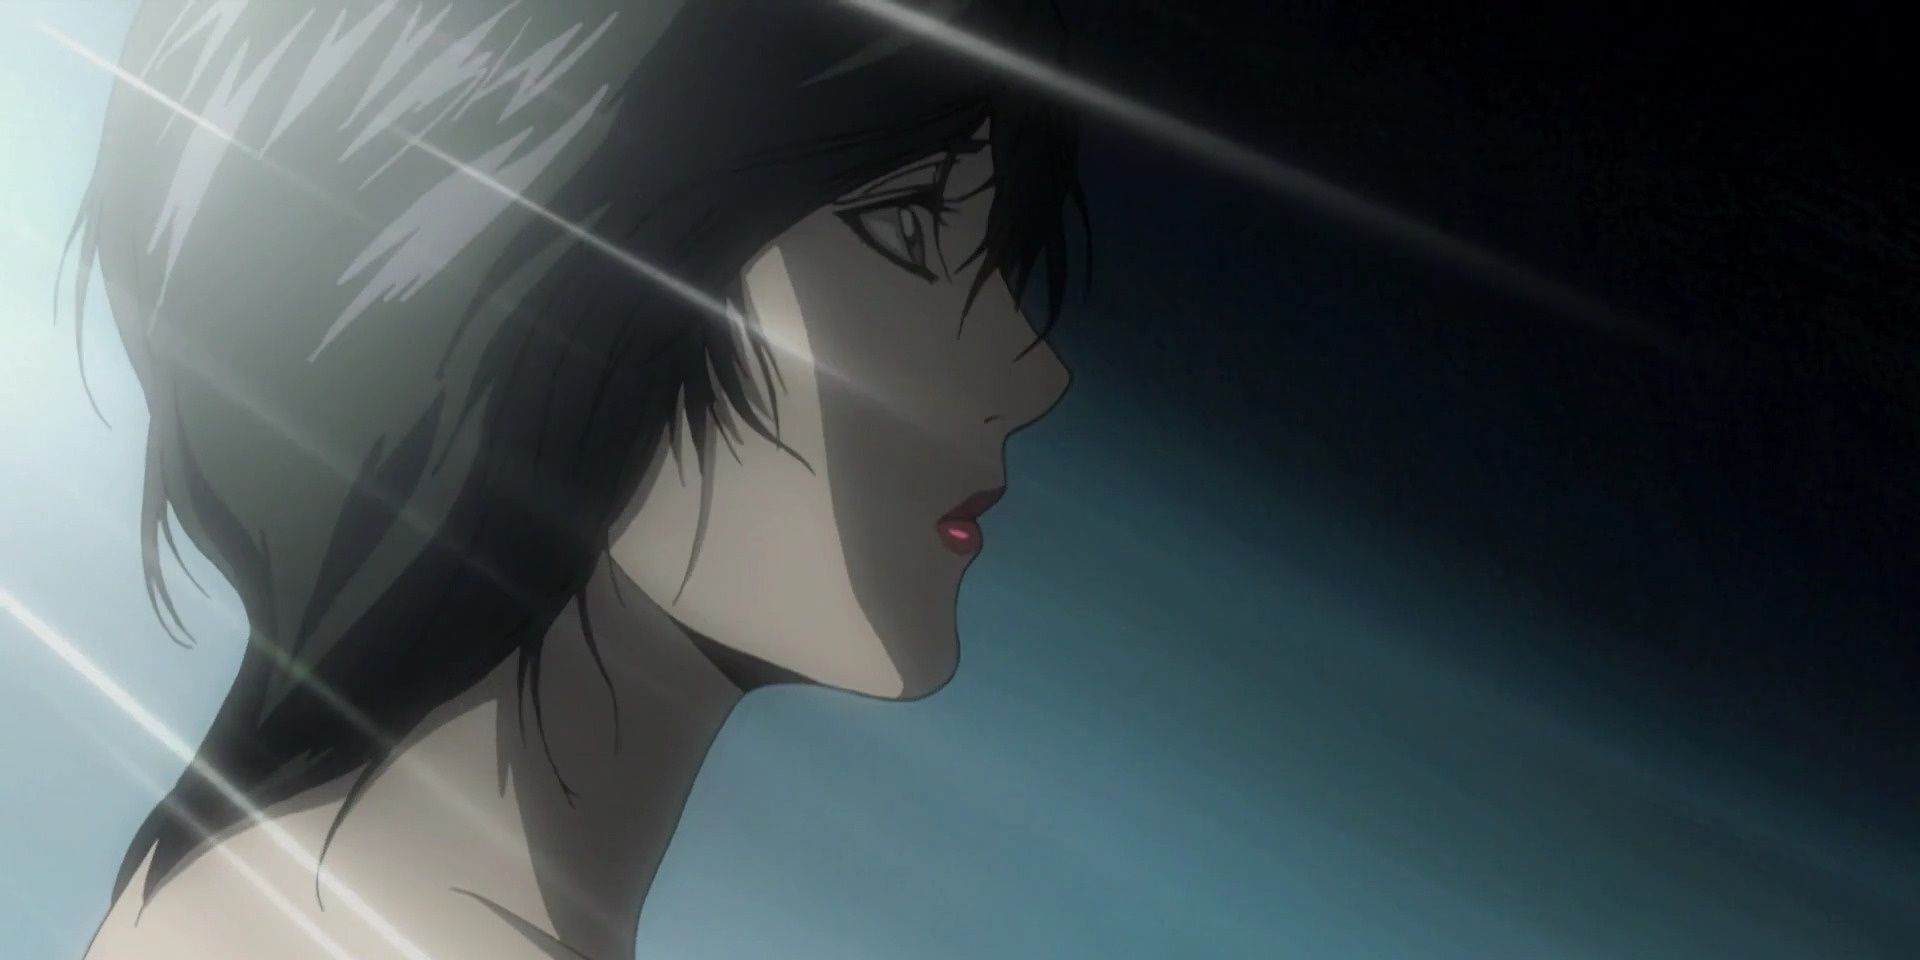 Takada from Death Note